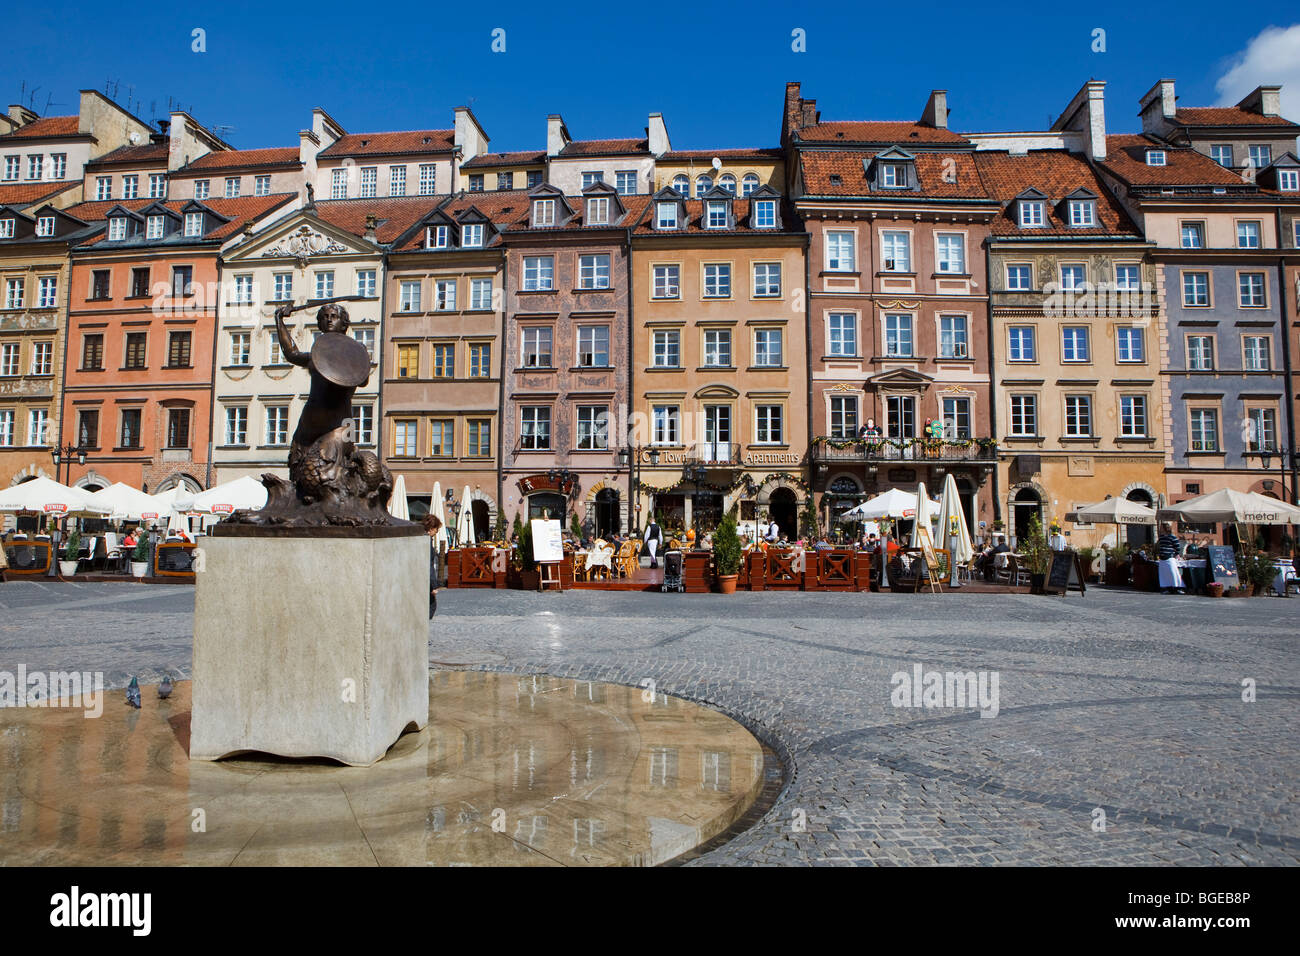 A statue in Old Town in Warsaw, Poland Stock Photo